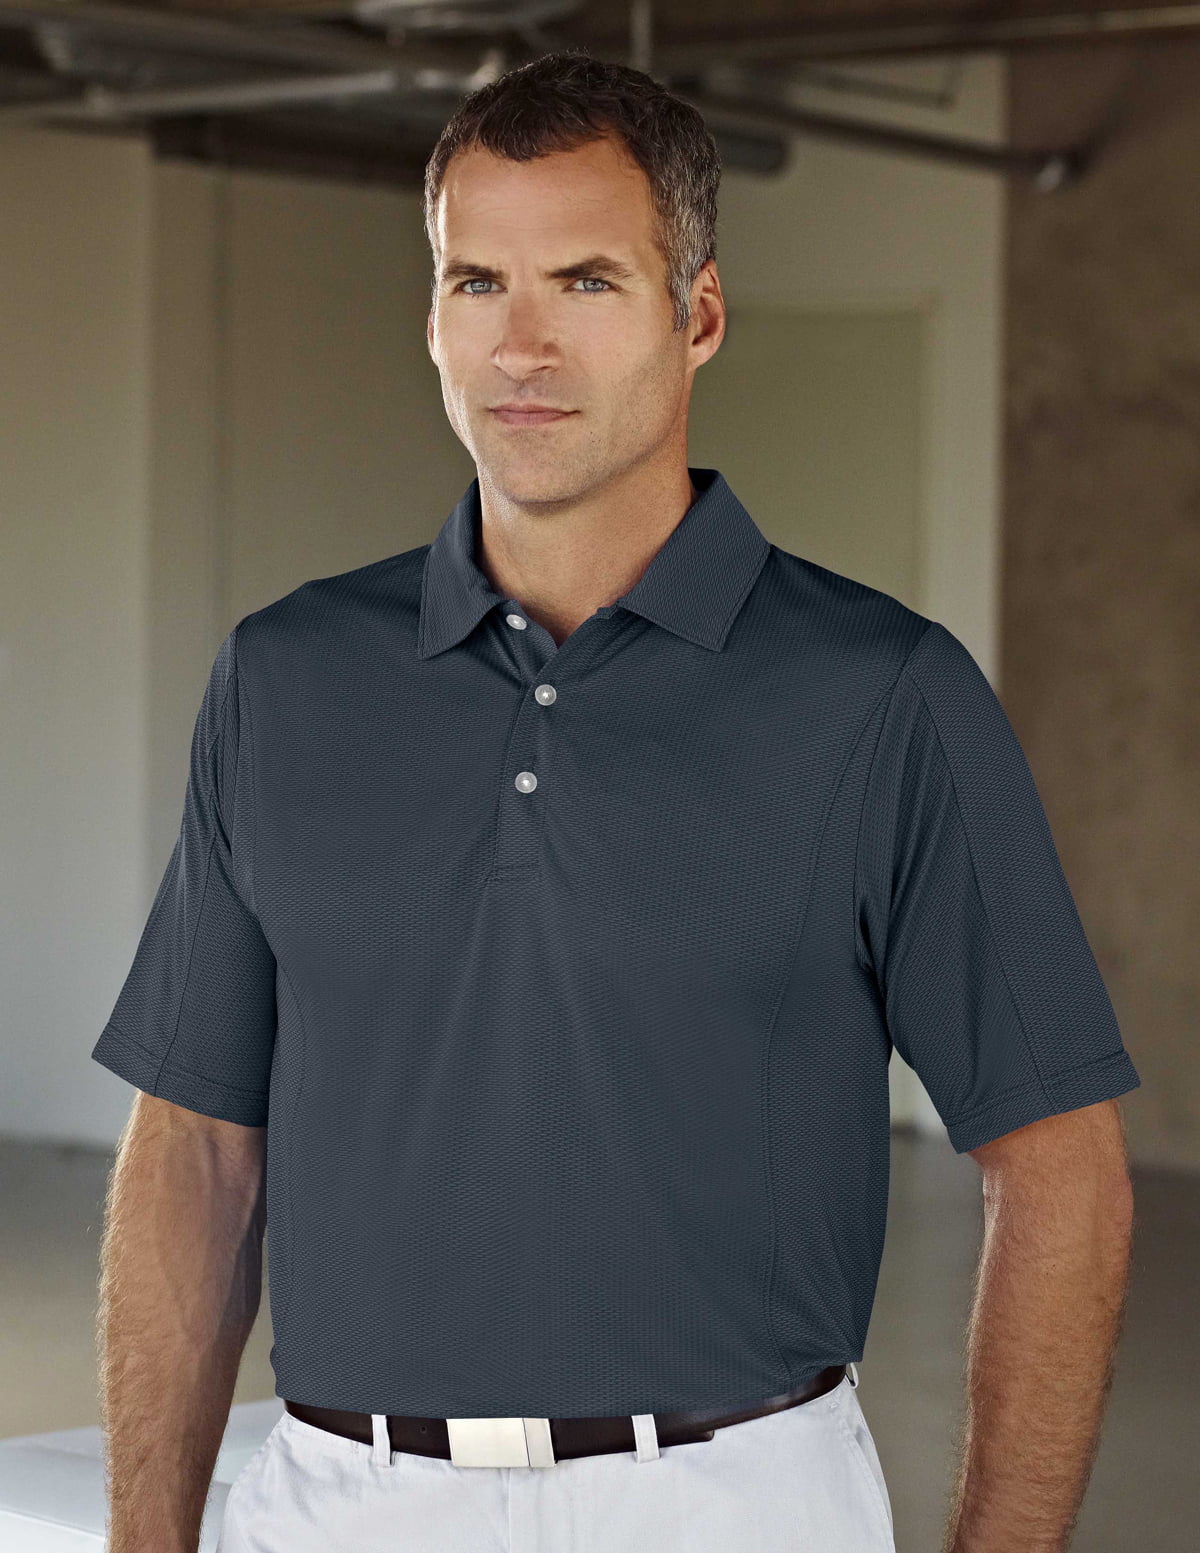 Tri-Mountain Gold Westchester 438 Knit Polo Shirt, 3X-Large, Navy ...